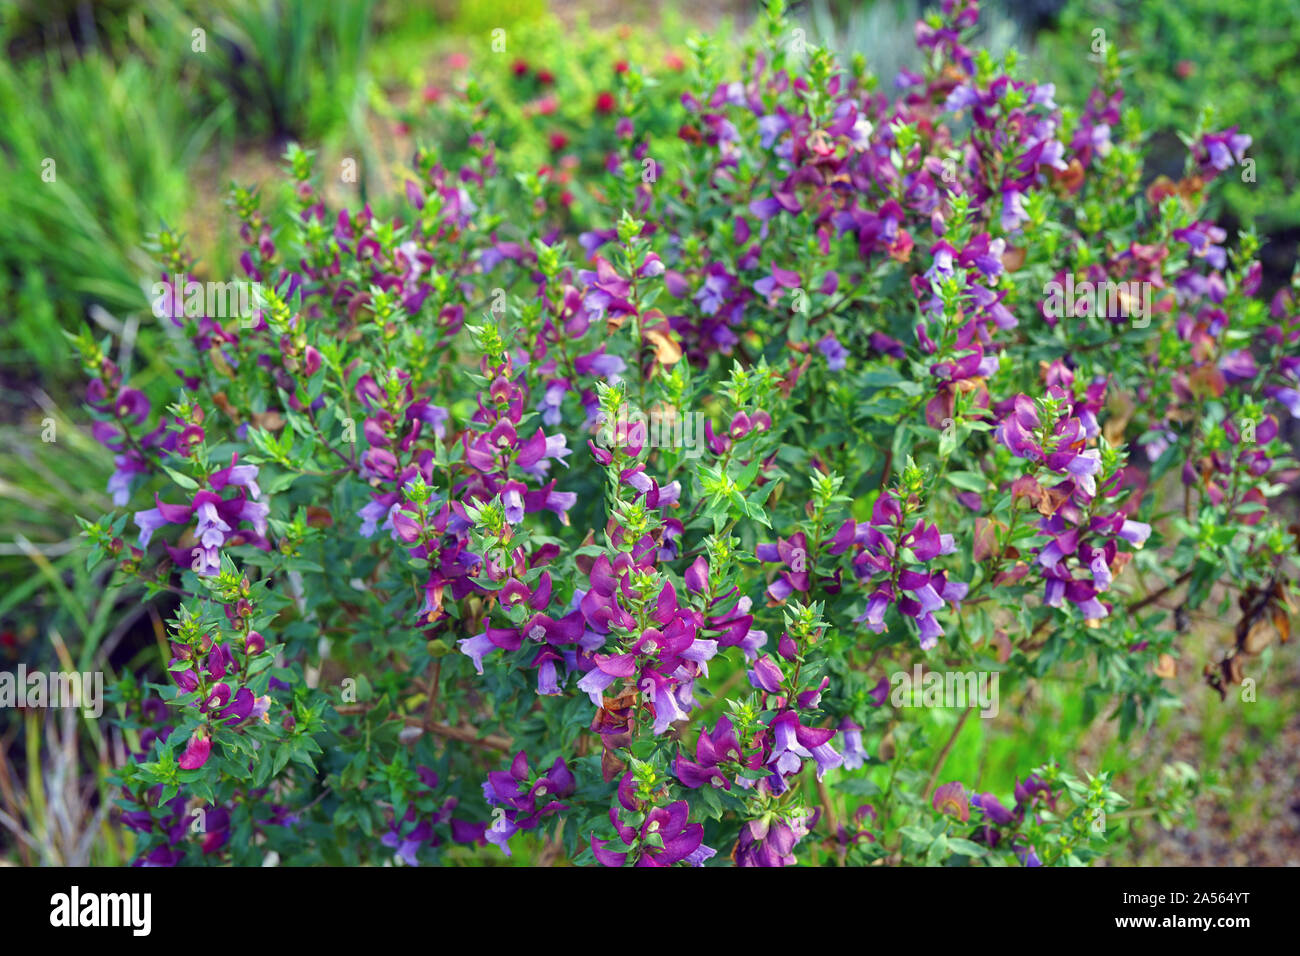 View of a Magnificent Prostanthera (Prostanthera Magnifica) purple flower in Australia Stock Photo